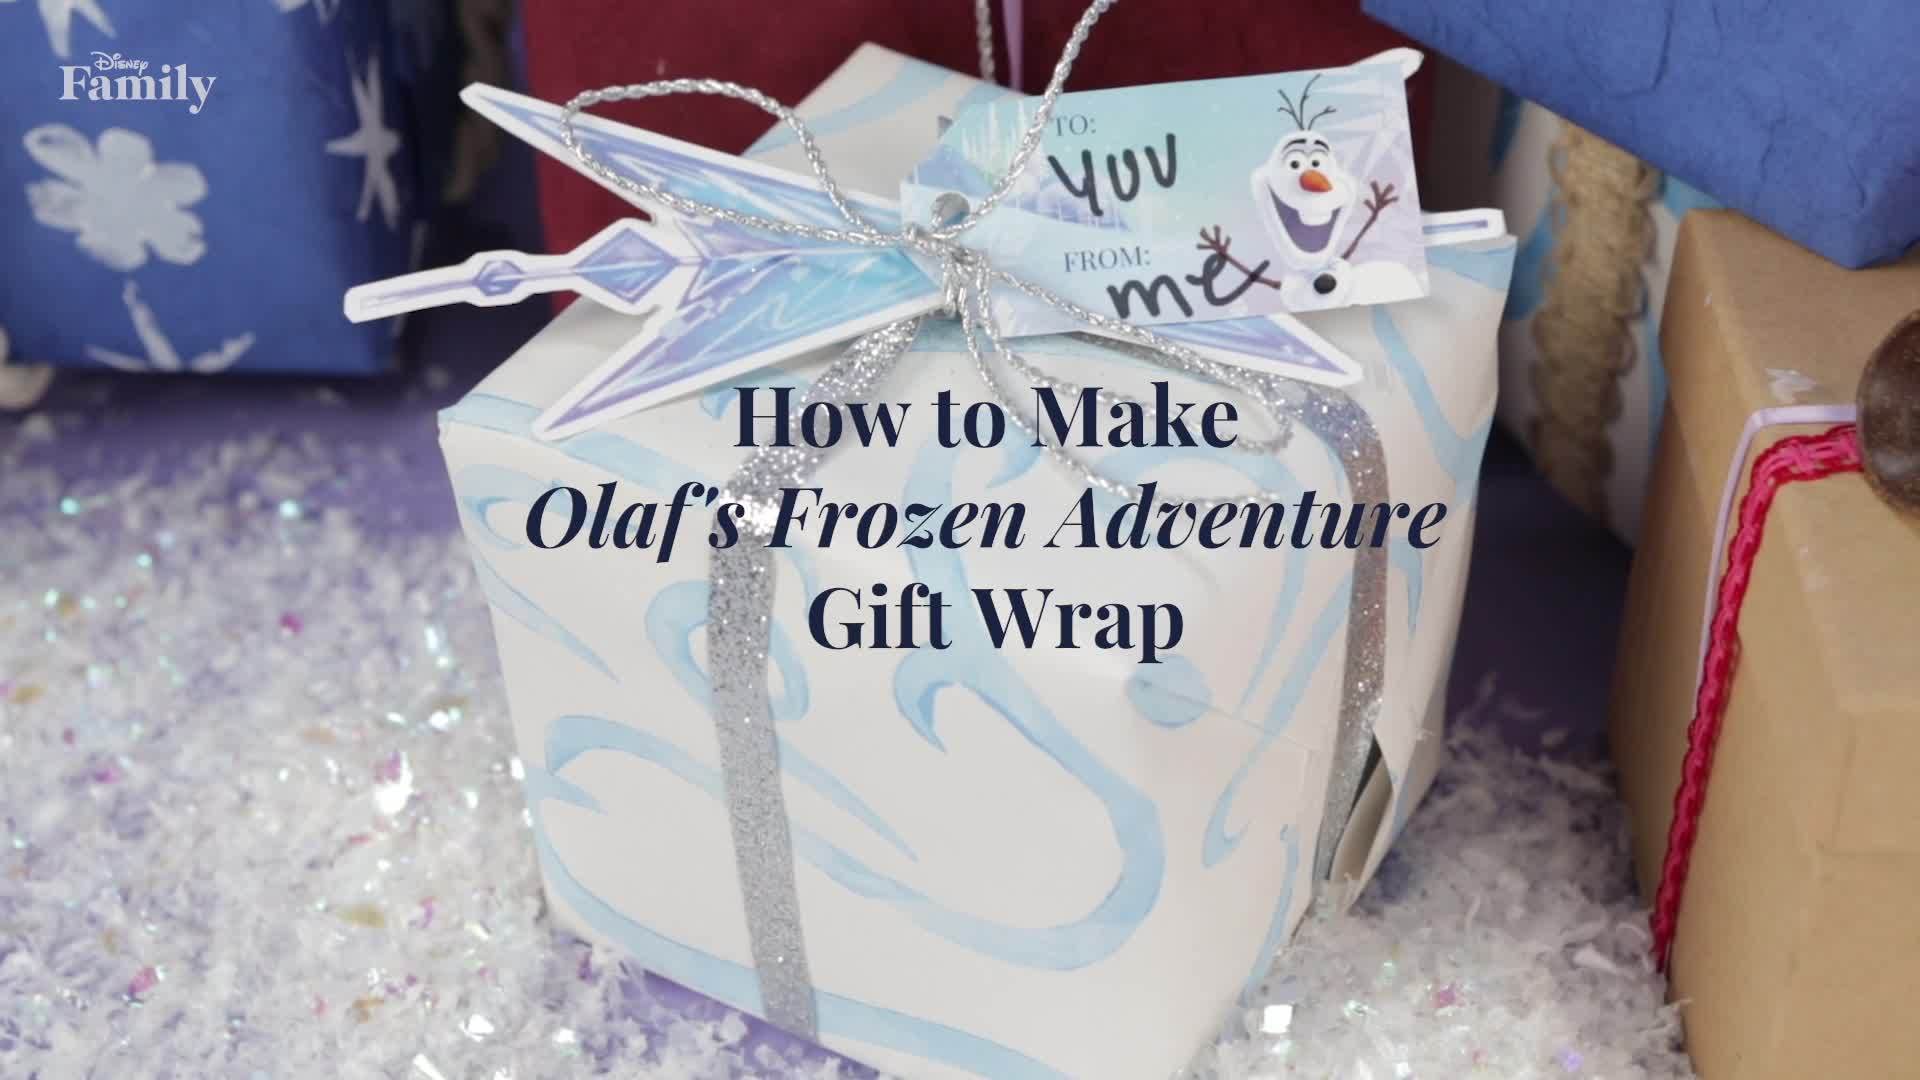 How to Make Olaf's Frozen Adventure Gift Wrap | Disney Family